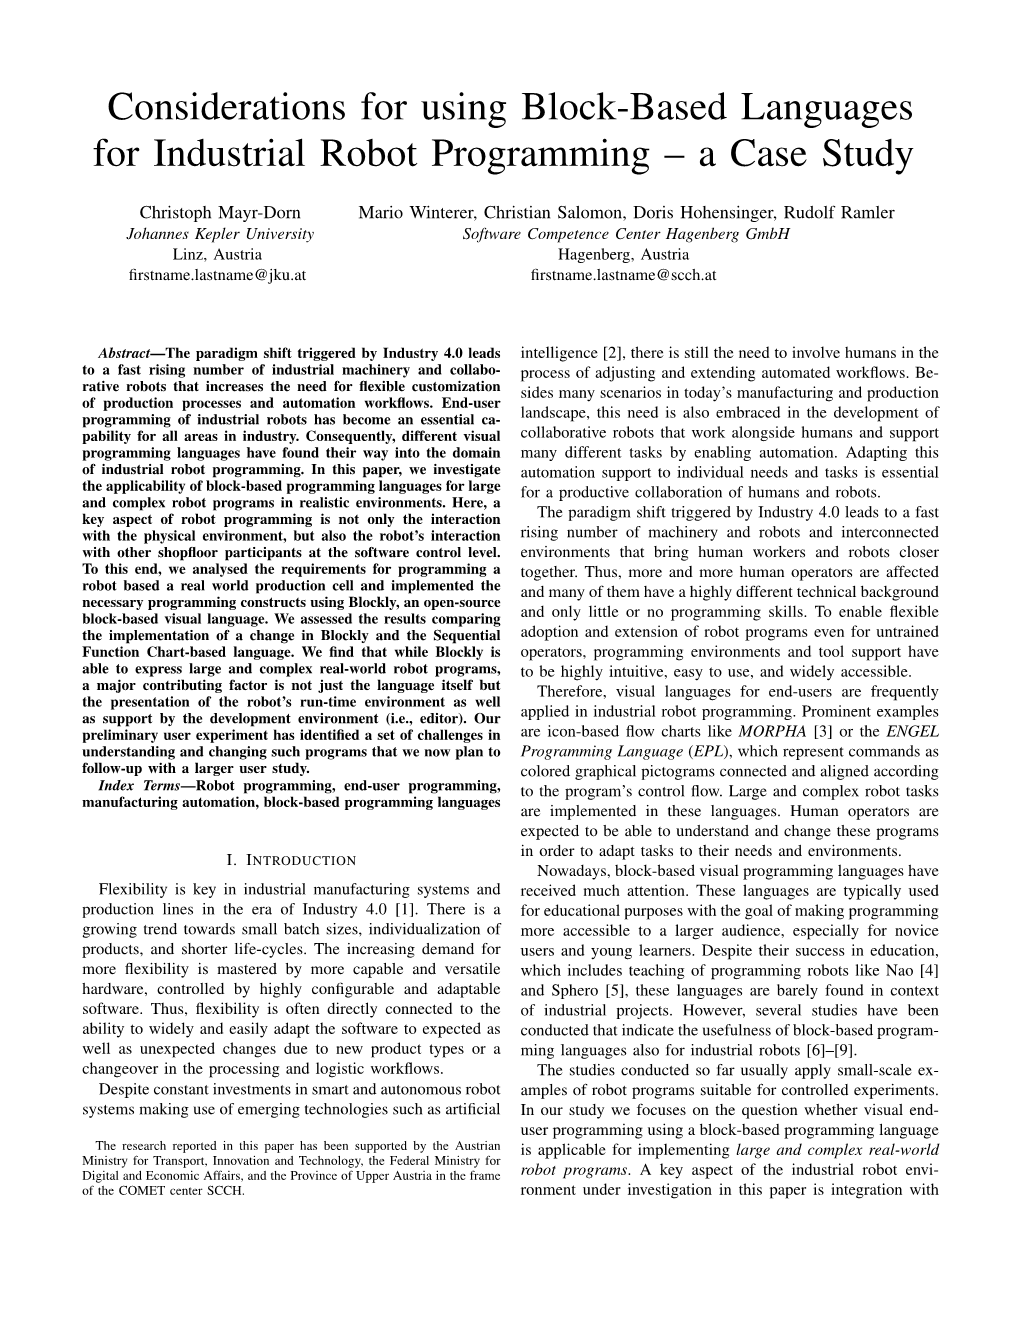 Considerations for Using Block-Based Languages for Industrial Robot Programming – a Case Study